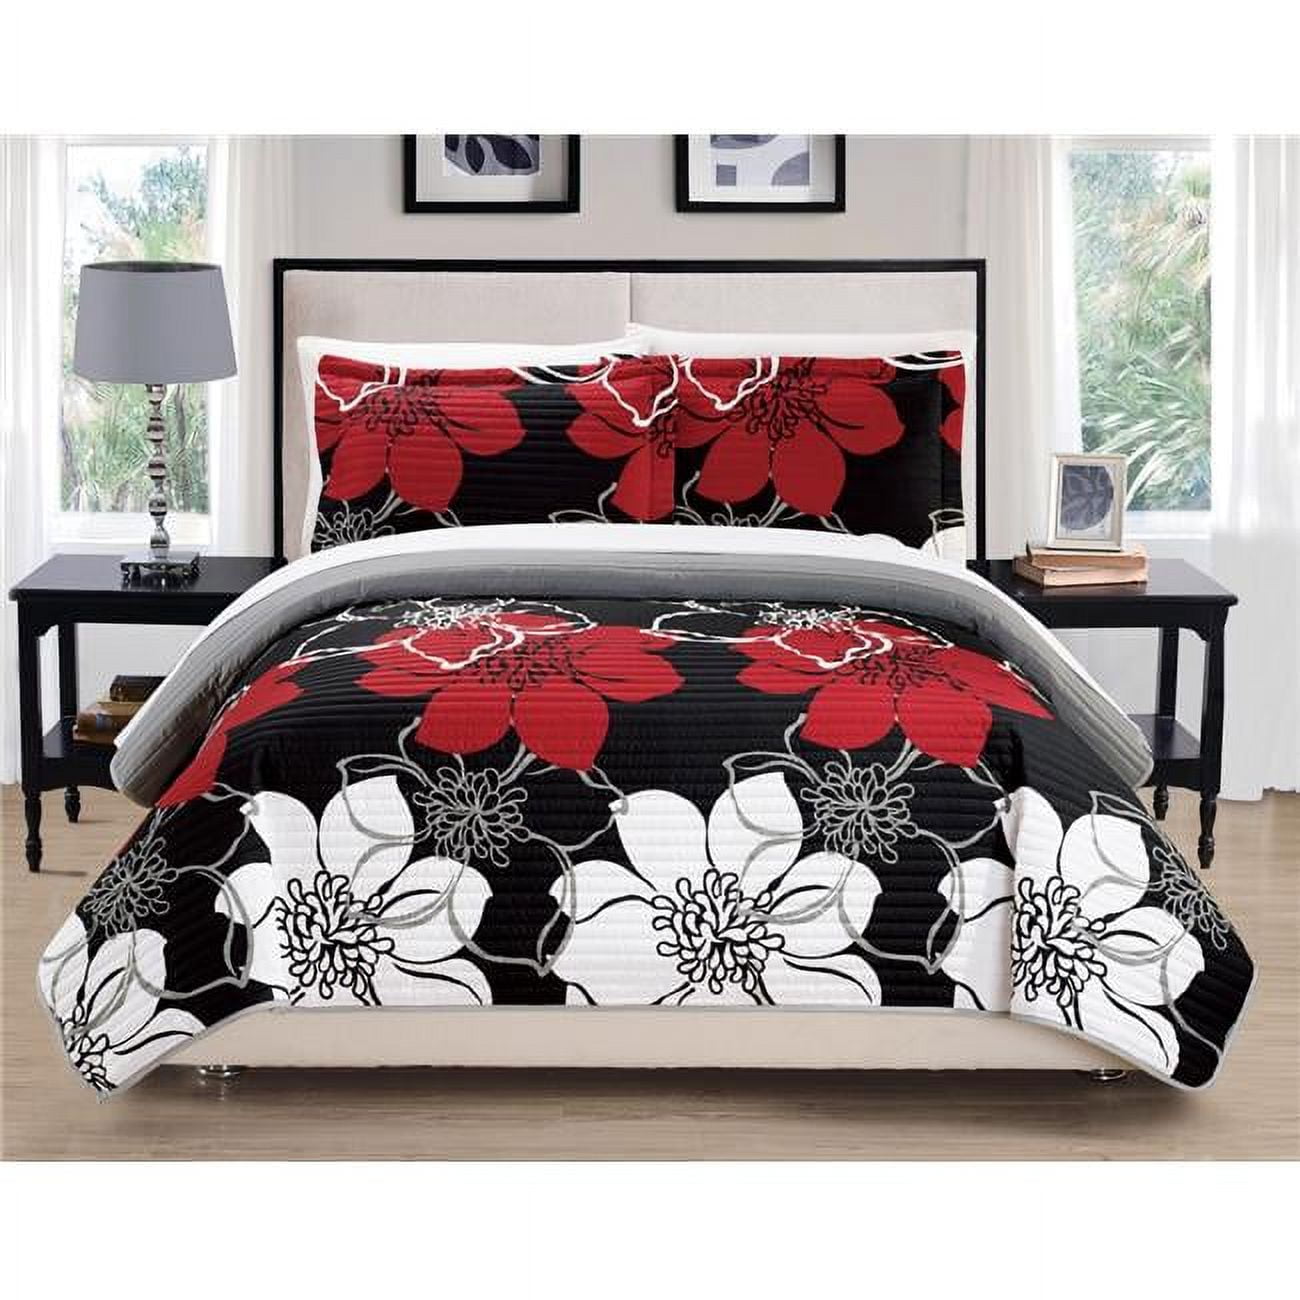 7 Piece Capiz Abstract Large Scale Floral Printed Queen Quilt Set, Black Sheets